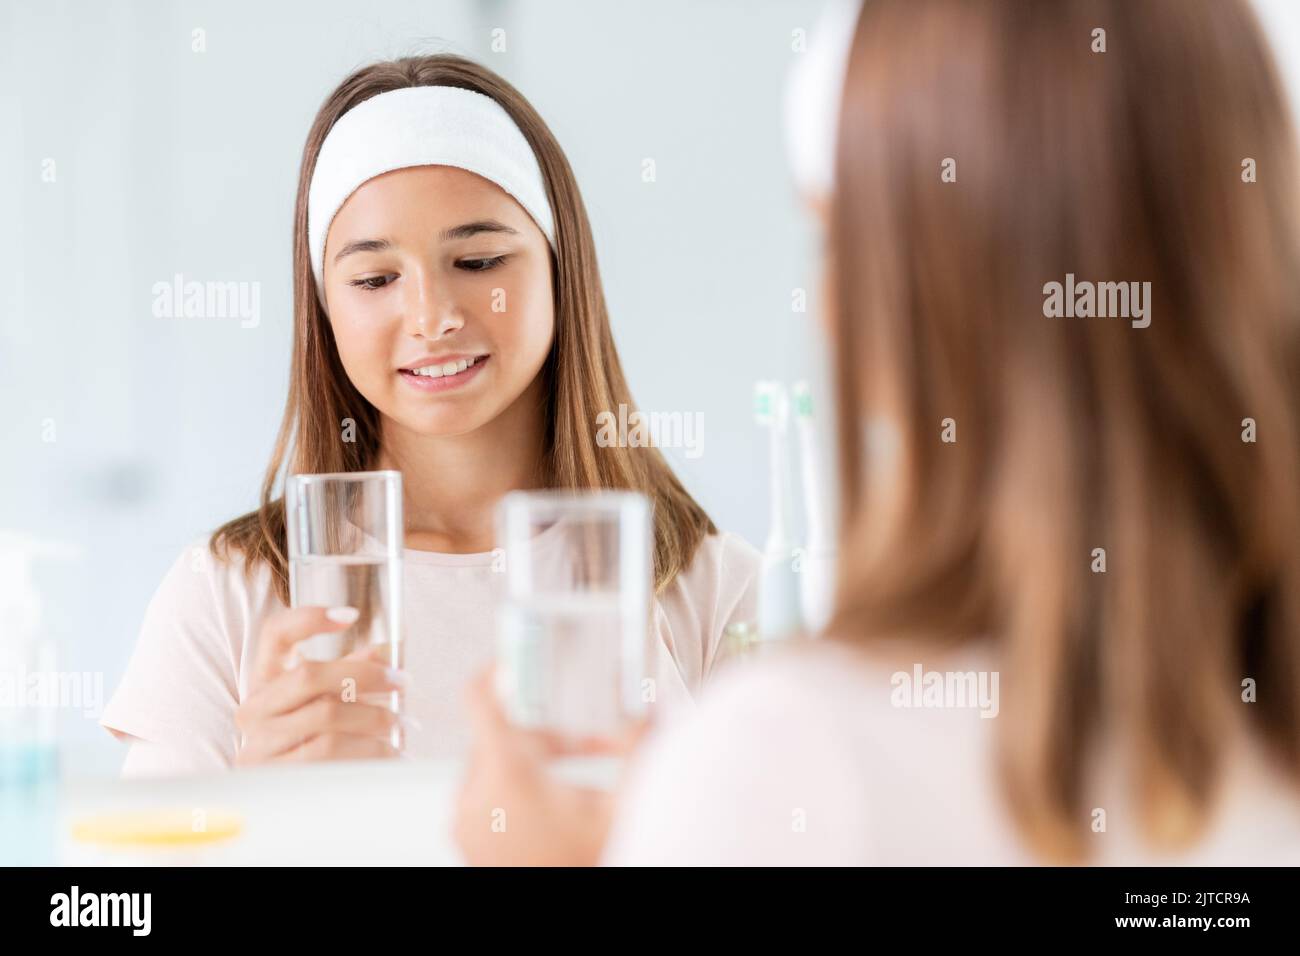 teenage girl with glass of water looking in mirror Stock Photo